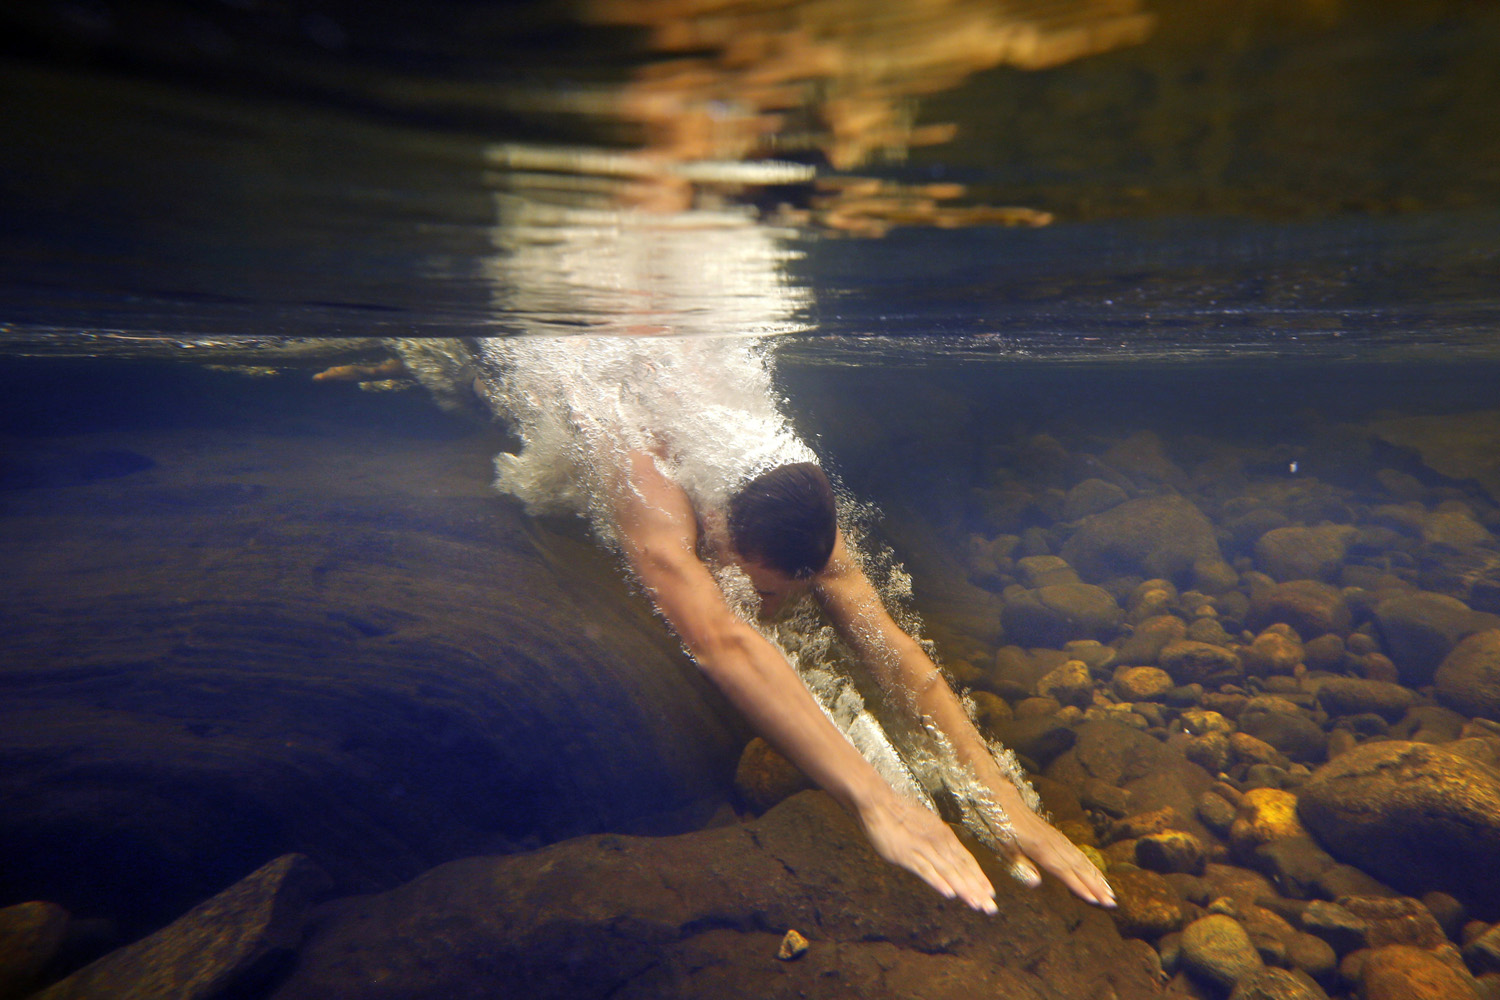 Jul. 11, 2014. Russell Norris, 15, of Tylertown, Miss., dives into the chilly Swift River at Coos Canyon in Byron, Maine. The canyon is considered one of the premier swimming holes in the U.S.